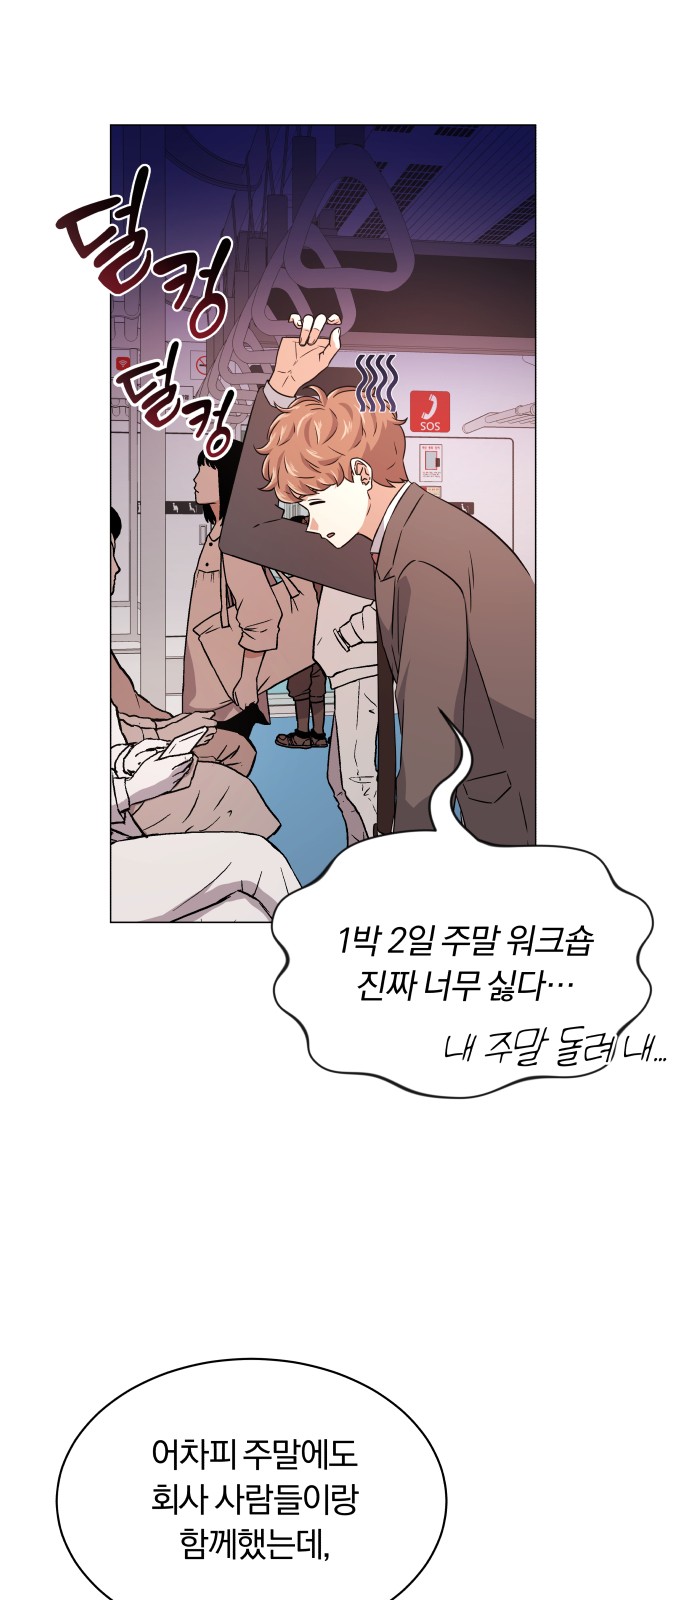 Superstar Cheon Dae-ri - Chapter 13 - Page 3